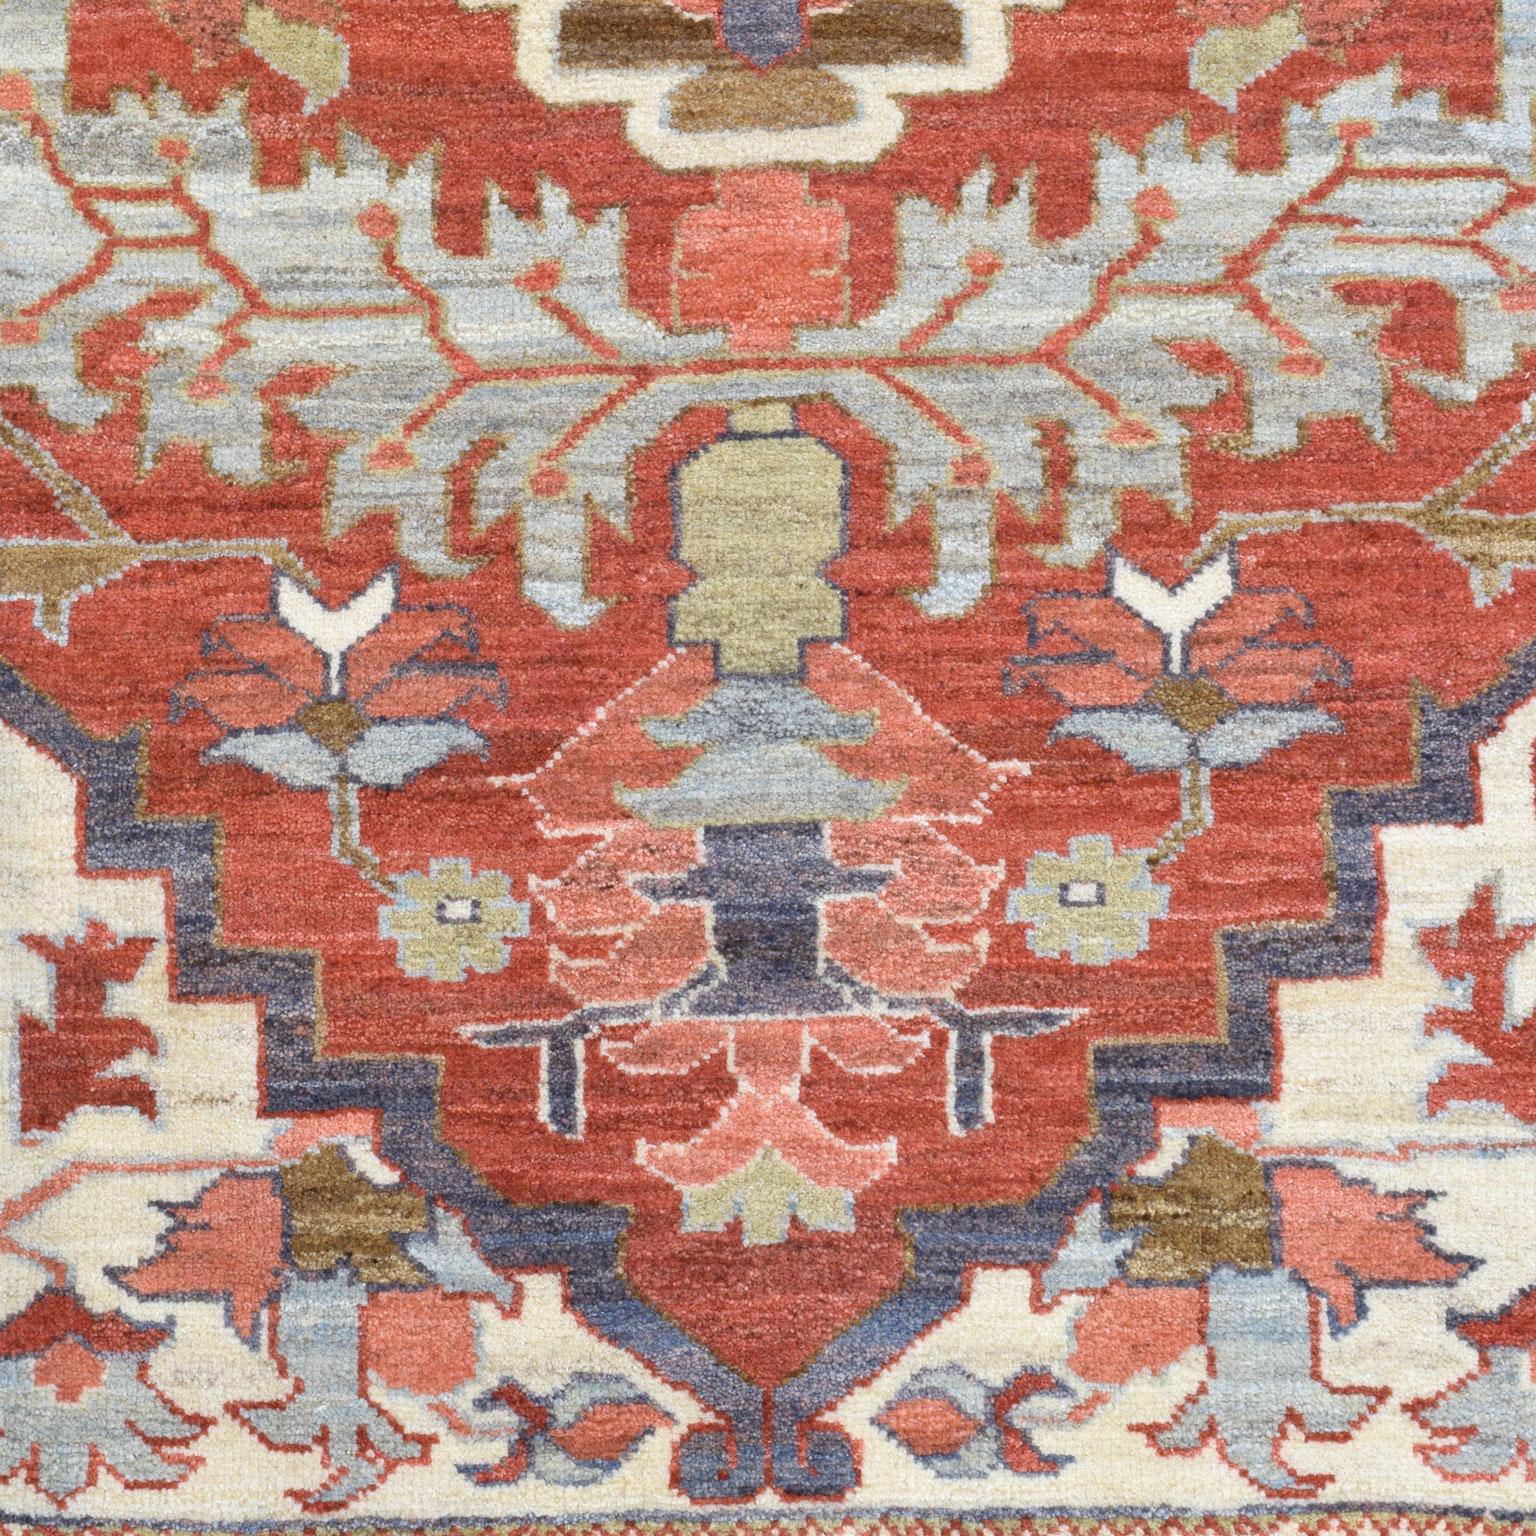 Persian Wool Transitional Heriz Rug, Red, Blue and Cream, Hand-Knotted, 8’ x 10’ For Sale